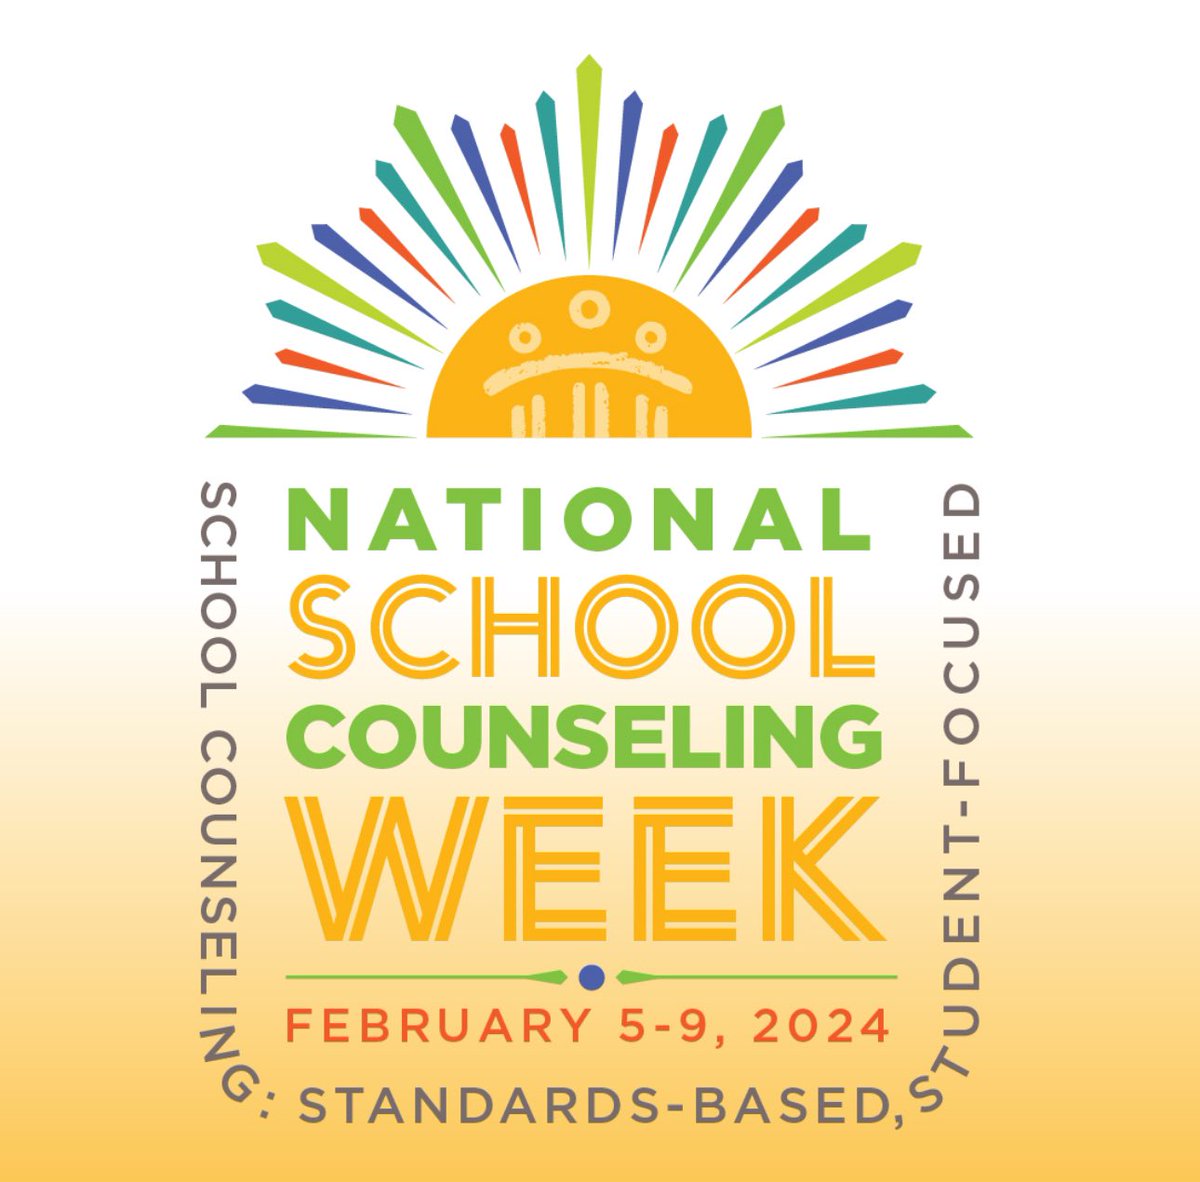 Thank you, School Counselors!!!